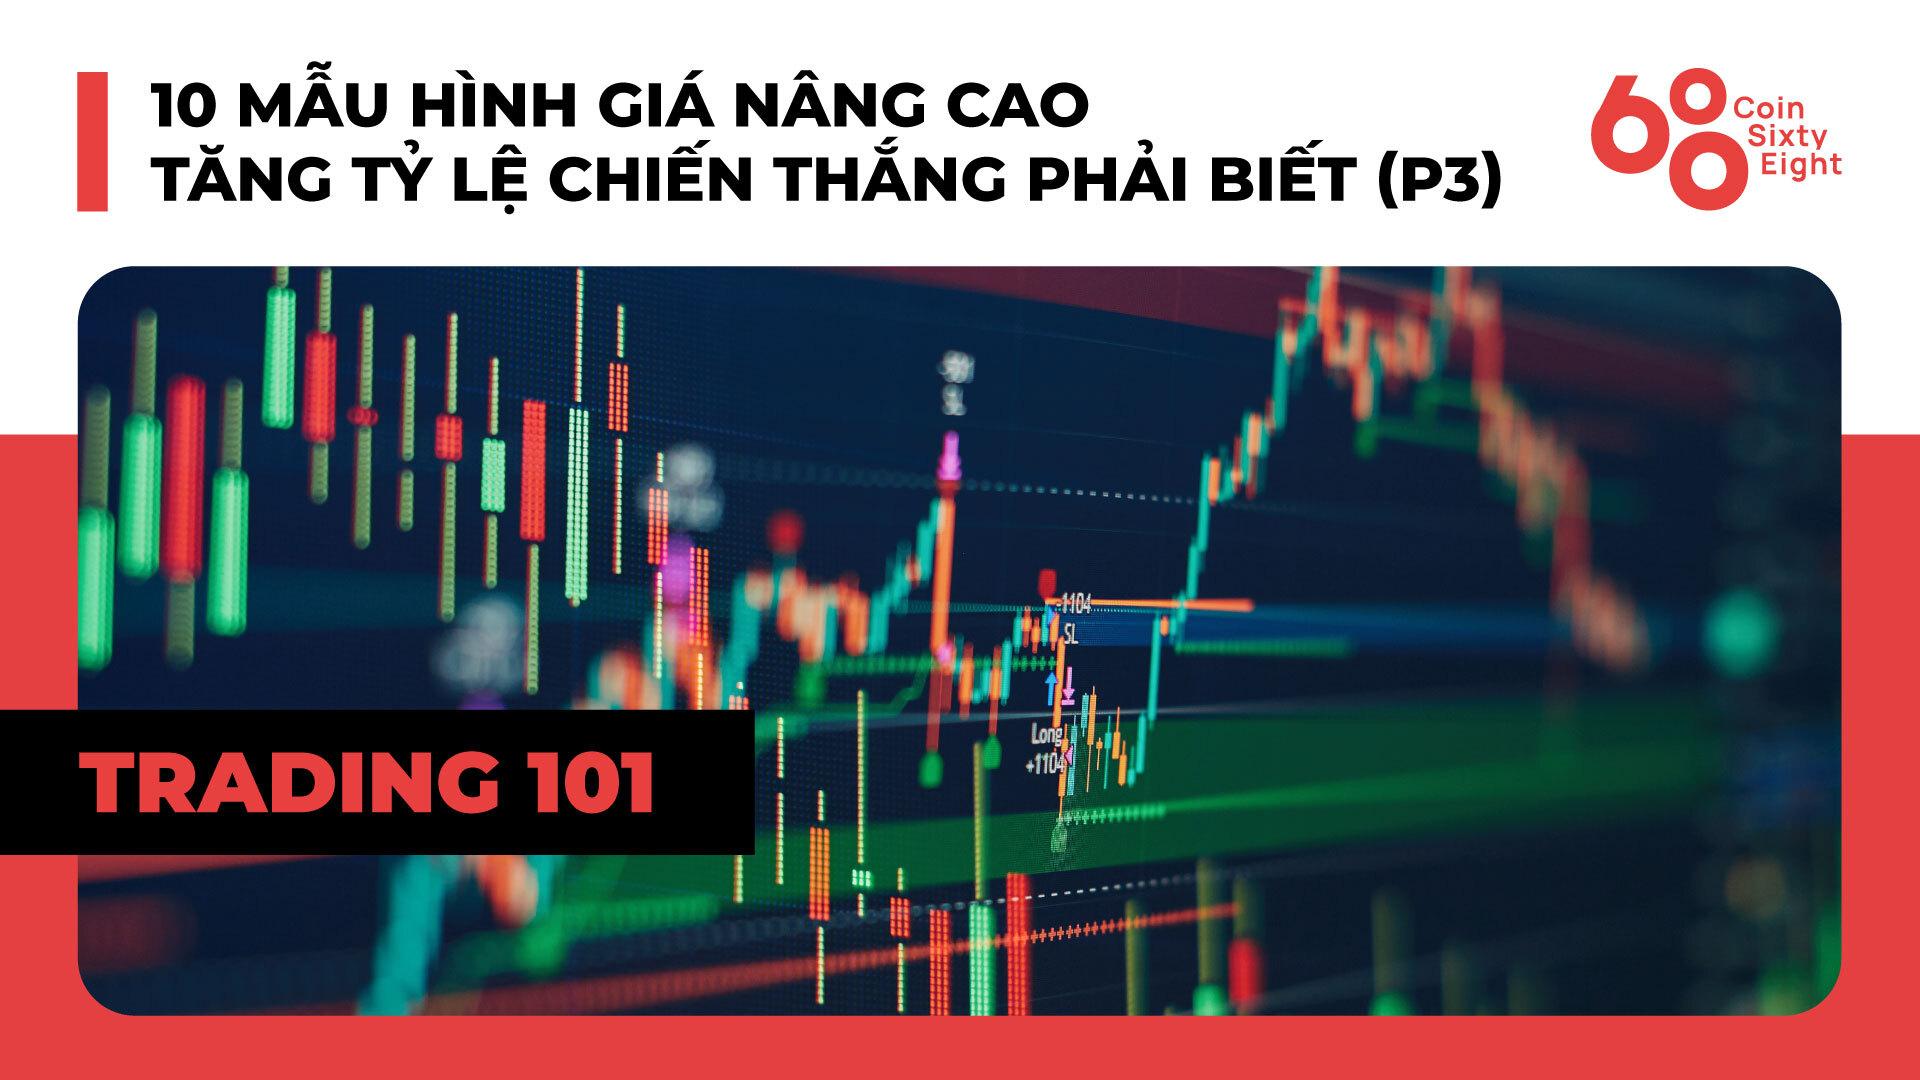 lop-giao-dich-101-price-action-trading-phan-18-10-mau-hinh-gia-nang-cao-tang-ty-le-chien-thang-phai-biet-p3